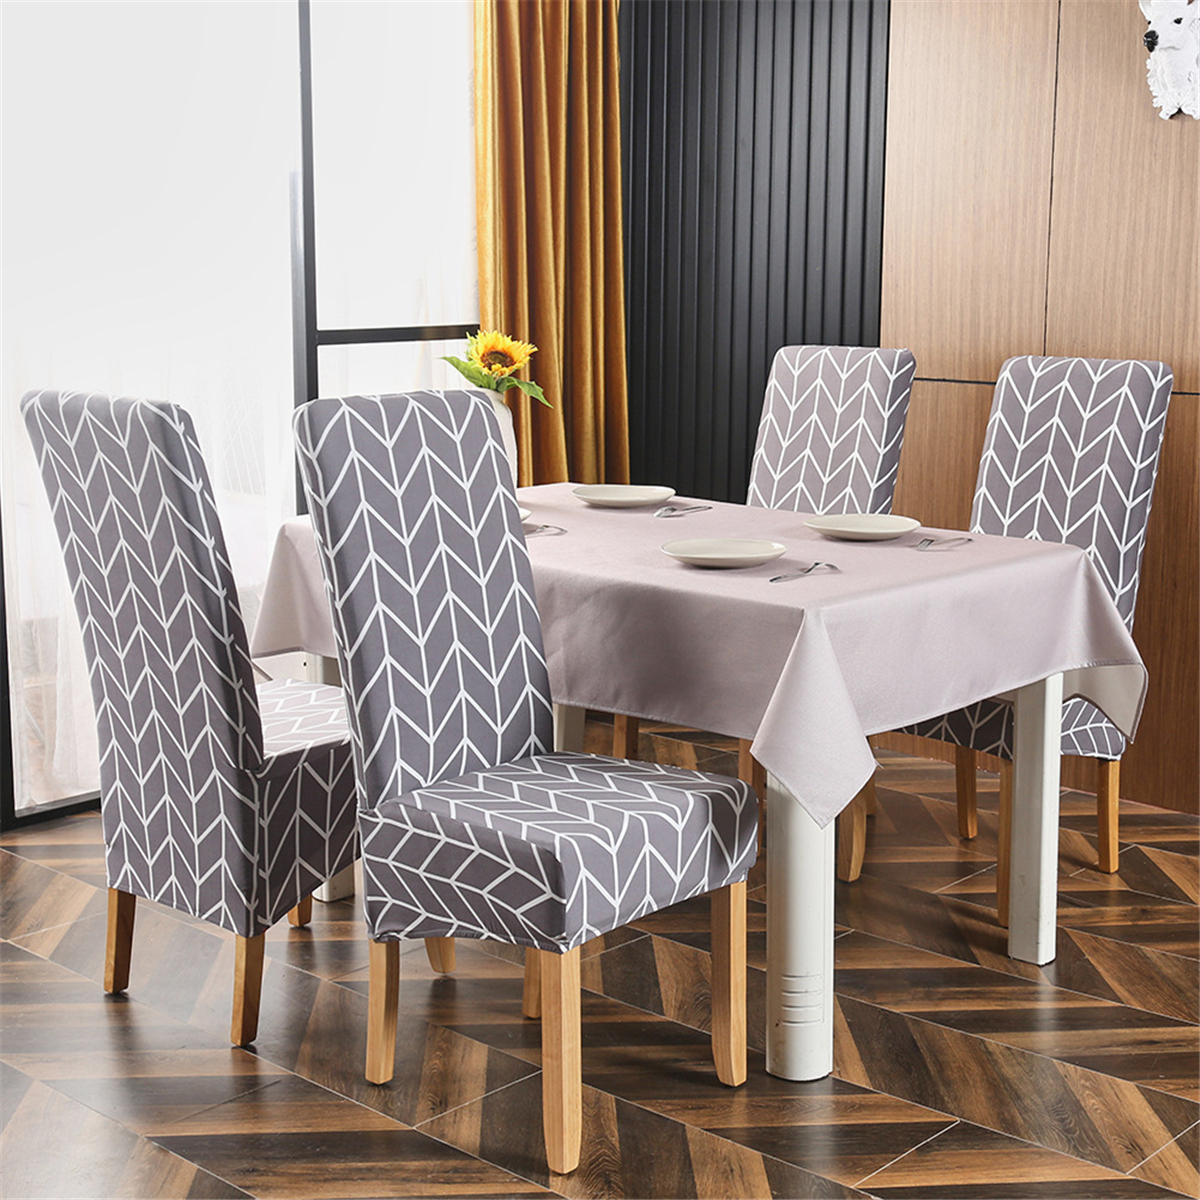 Printed-Stretch-Chair-Cover-Elastic-Seat-Chair-Covers-Office-Chair-for-Slipcovers-Restaurant-Banquet-1765523-9